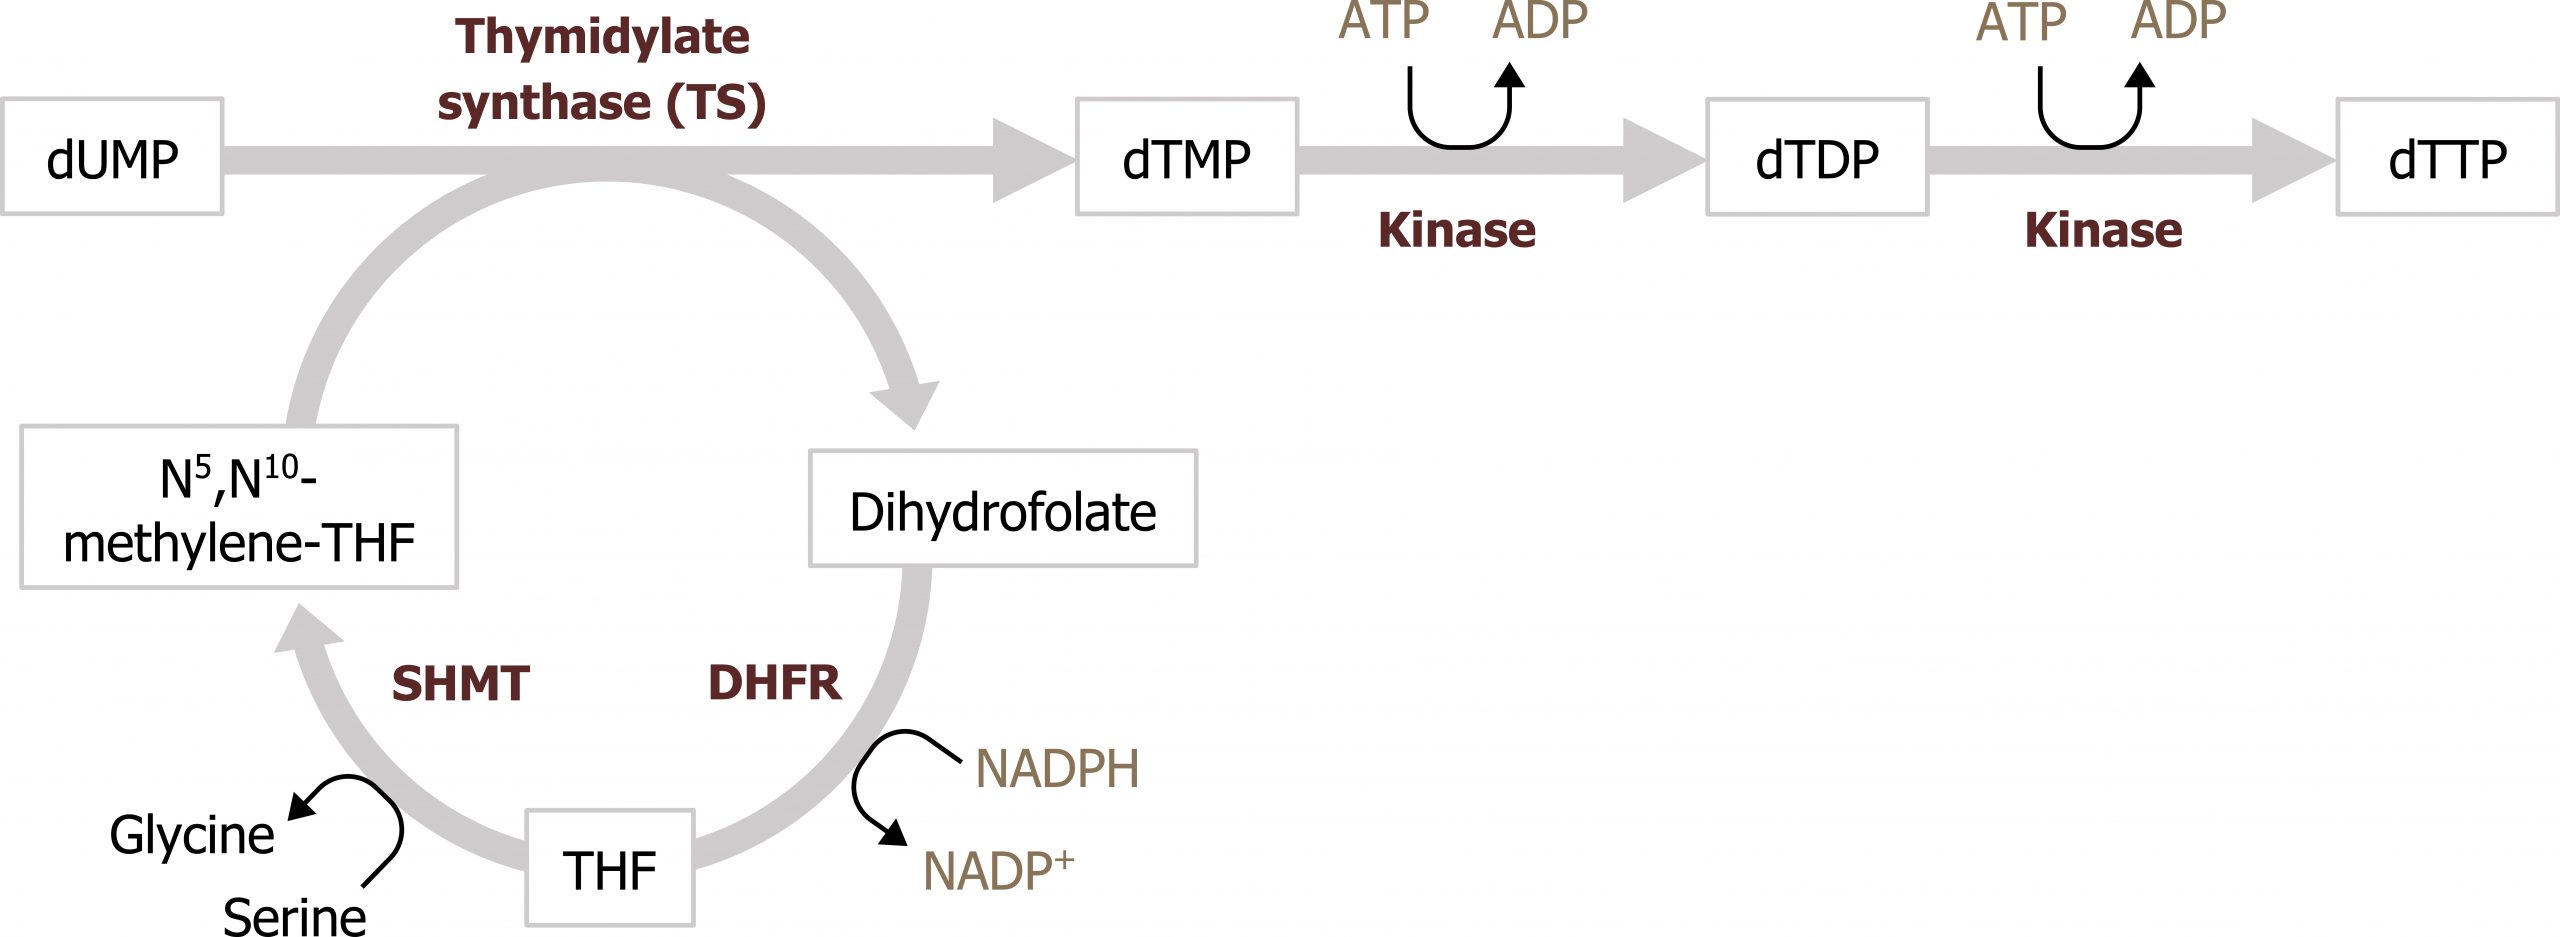 dUMP arrow enzyme thymidylate synthase to dTMP arrow with ATP arrow ADP and enzyme kinase to dTDP arrow with ATP arrow ADP and enzyme kinase to dTTP. Circular diagram attached to arrow between dUMP, to dihydrofolate arrow with NADPH arrow NADP+ and enzyme DHFR to THF arrow with Serine arrow glycine and enzyme SHMT to N5, N10 methylene-THF.